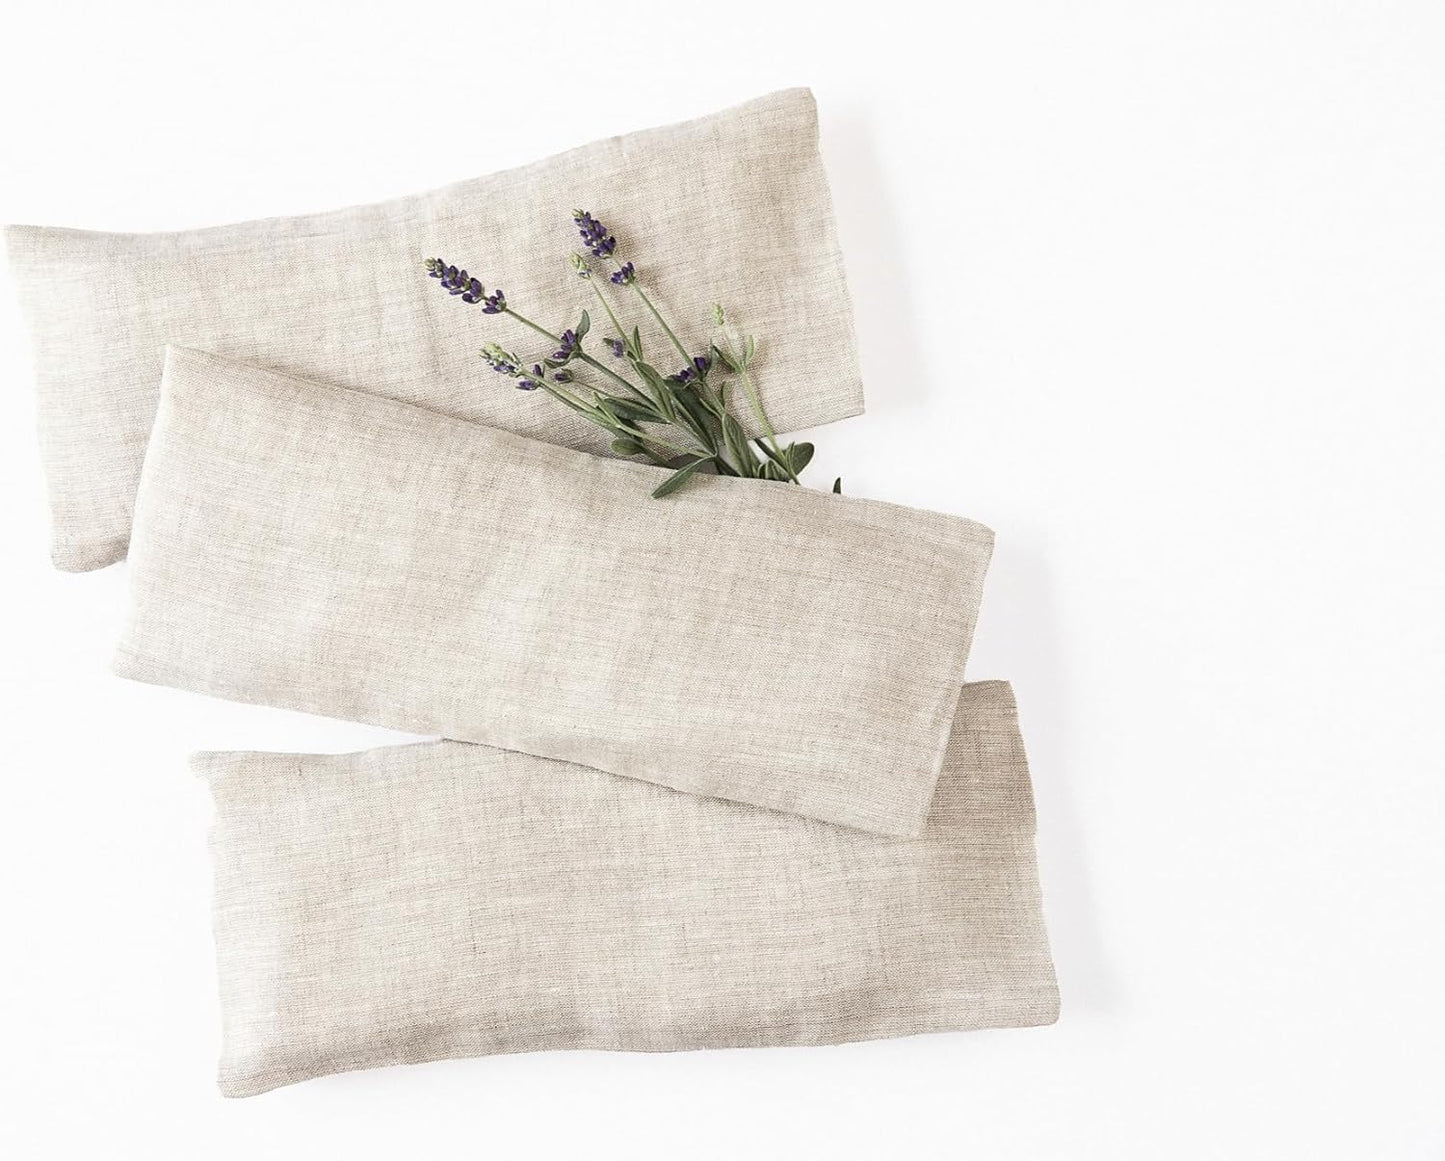 Lavender Eye Pillow - Aromatherapy & Stress Relief, Organic FlaxSeed Eye Mask, Yoga Gift, Spa Sleep Relaxation, Weighted Pillow, Eco Friendly